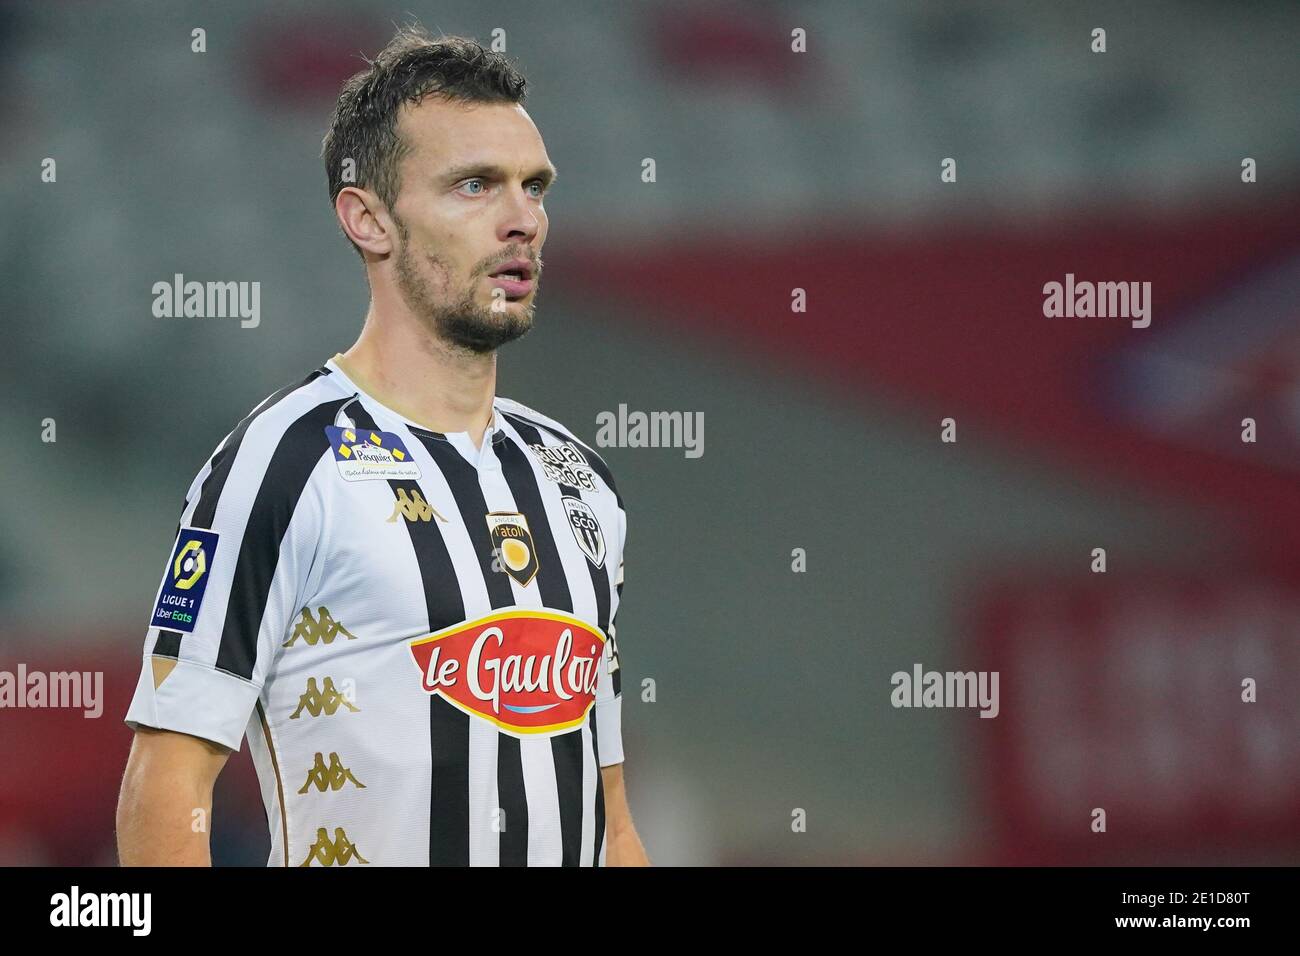 LILLE, FRANCE - JANUARY 6: Romain Thomas of Angers SCO during the Ligue 1 match between Lille OSC and Angers SCO at Stade Pierre Mauroy on January 6, 2021 in Lille, France (Photo by Jeroen Meuwsen/BSR Agency/Alamy Live News)*** Local Caption *** Romain Thomas Stock Photo